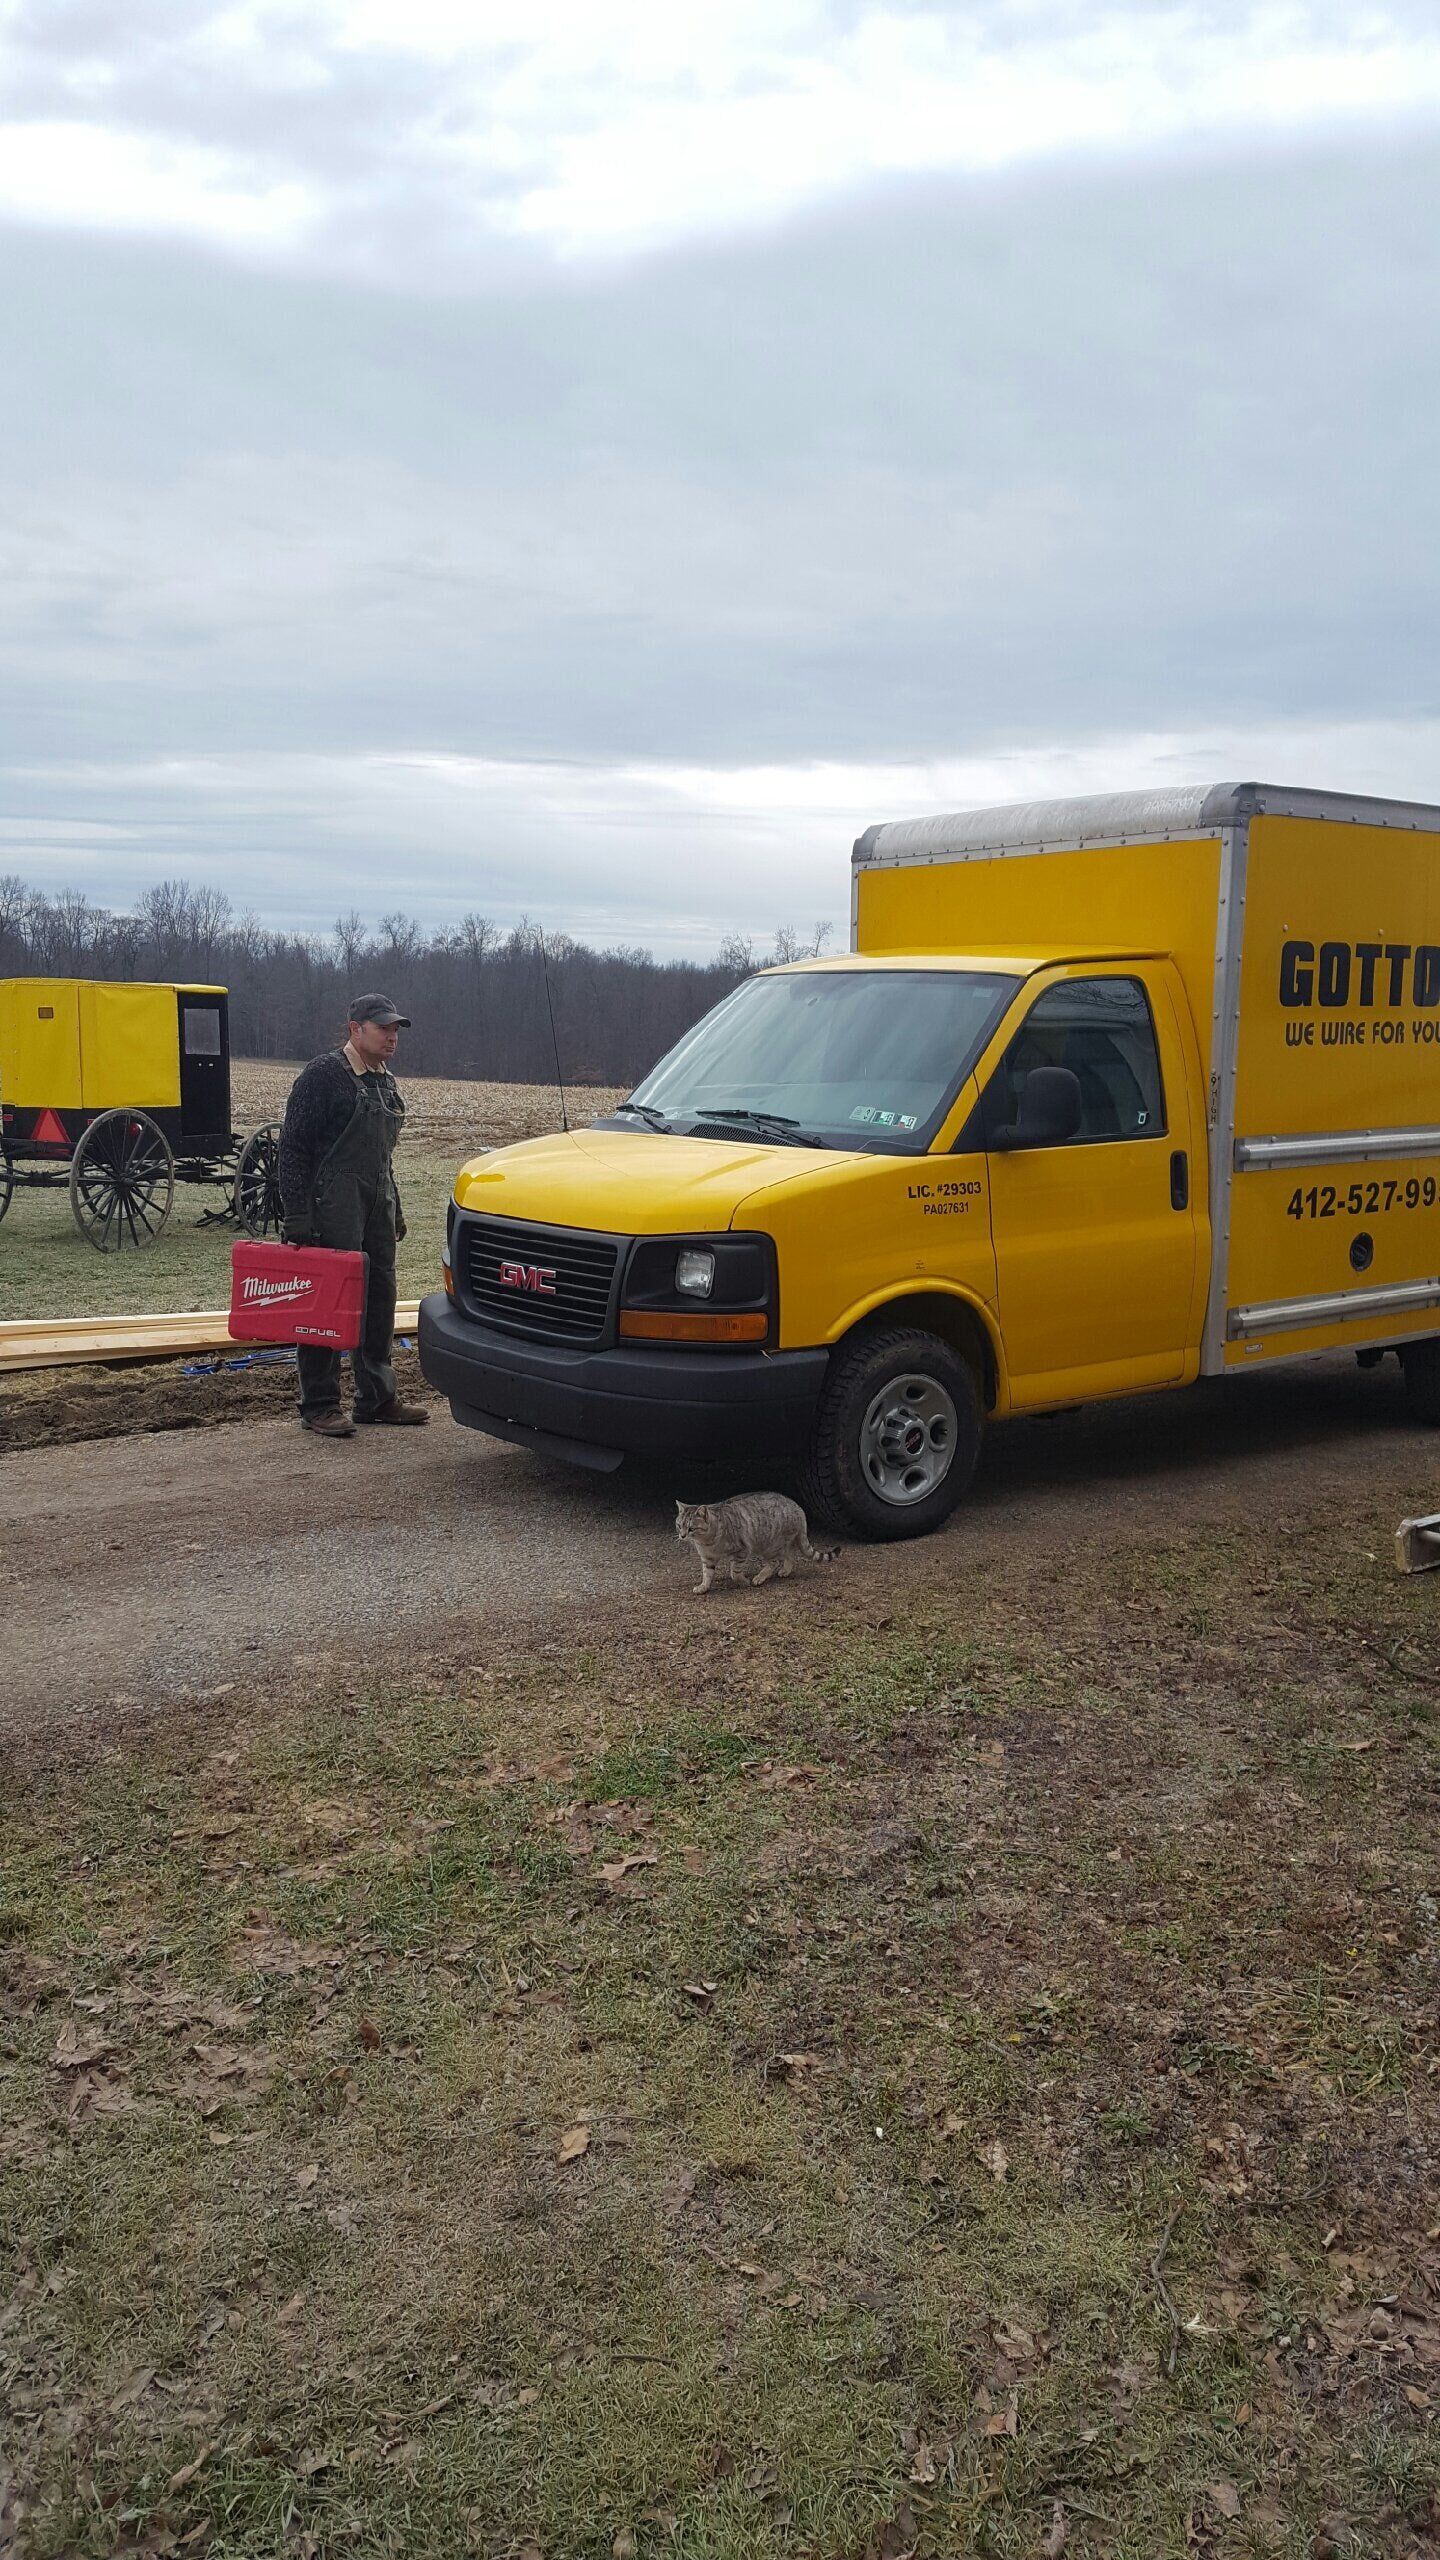 Gotto van — New Construction in Beaver, PA